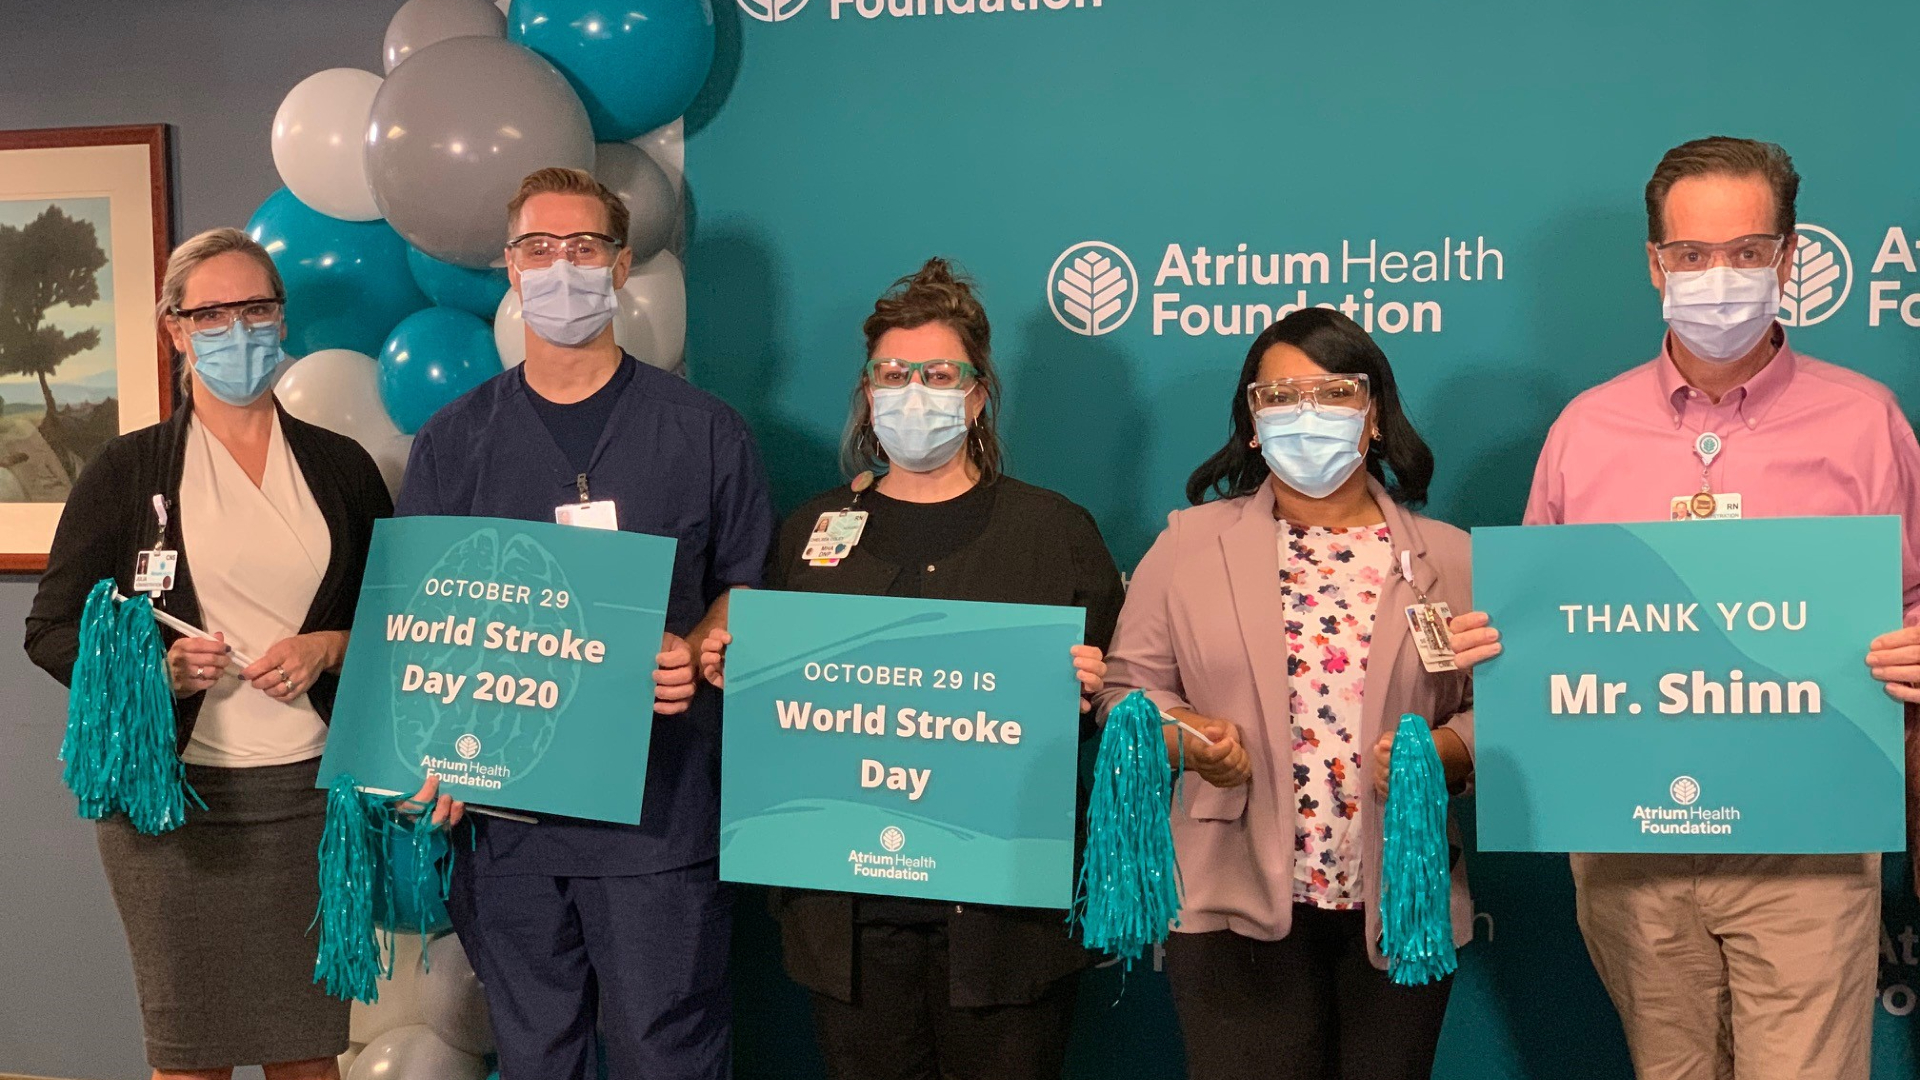 In conjunction with World Stroke Day, Atrium Health Foundation today announced a transformational gift from George Shinn in support of Atrium Health’s regional stroke network. In recognition of the $7.5 million gift, Atrium Health will name its stroke center in honor of George Shinn. 